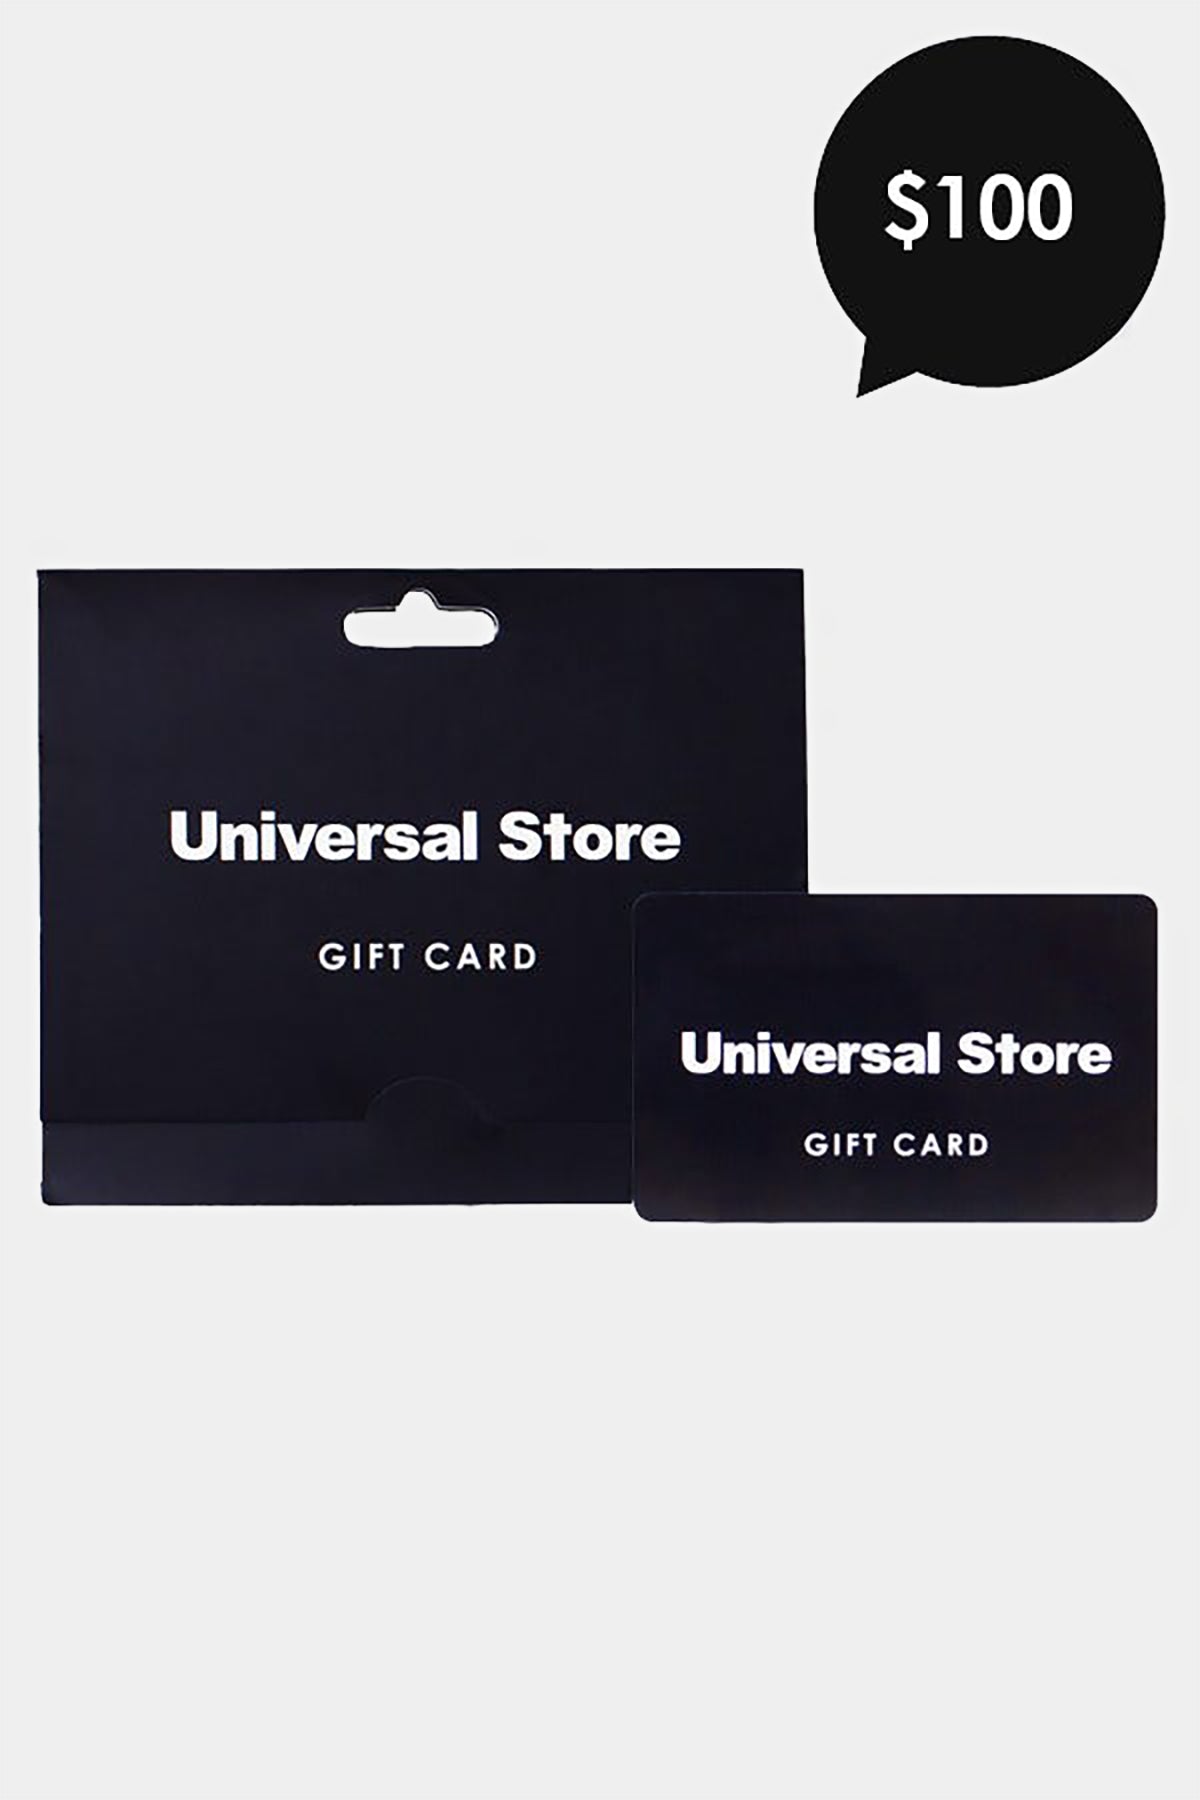 Universal Store $100 Gift Card